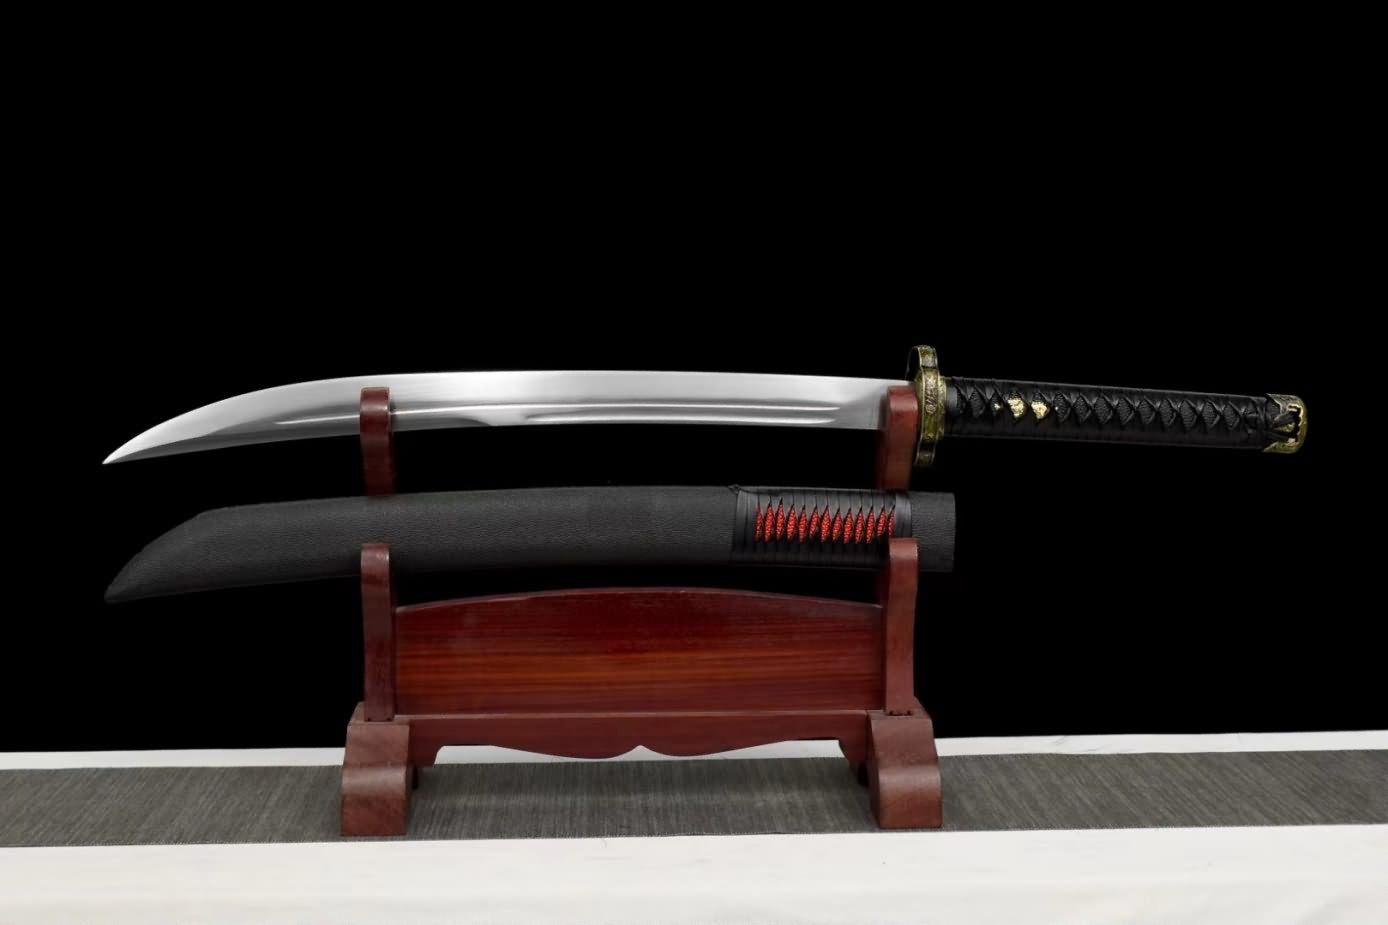 Qing dao Saber High Carbon Steel Blade,Pu Scabbard,LOONGSWORD